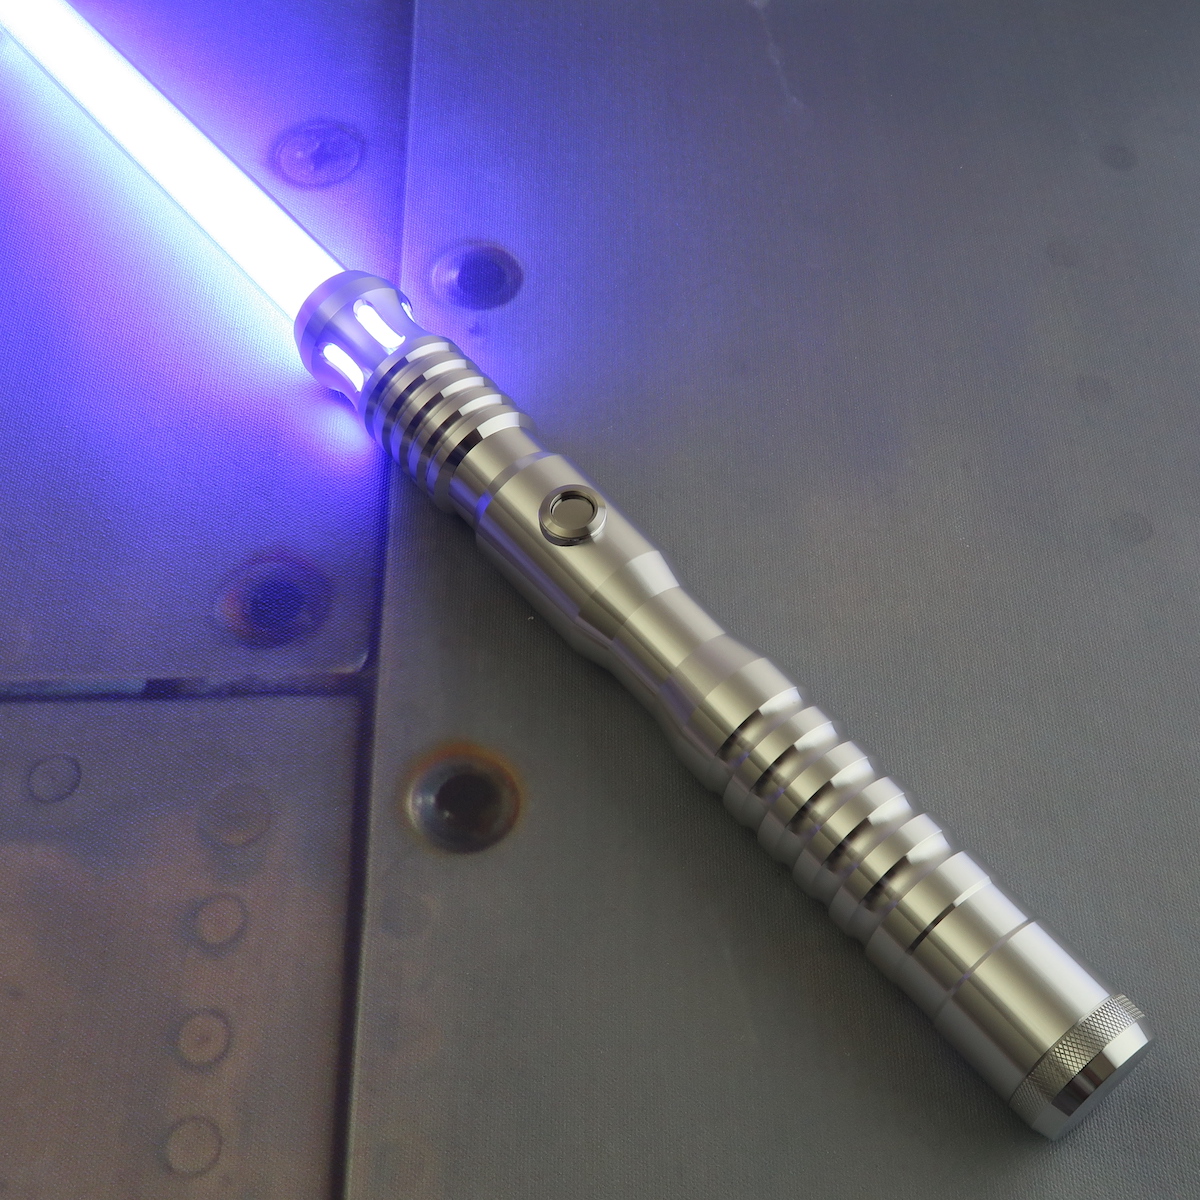 Aeon v4 Custom Combat Ready Lightsaber w/ Millions of Combinations Incl. Sound & LED Options.